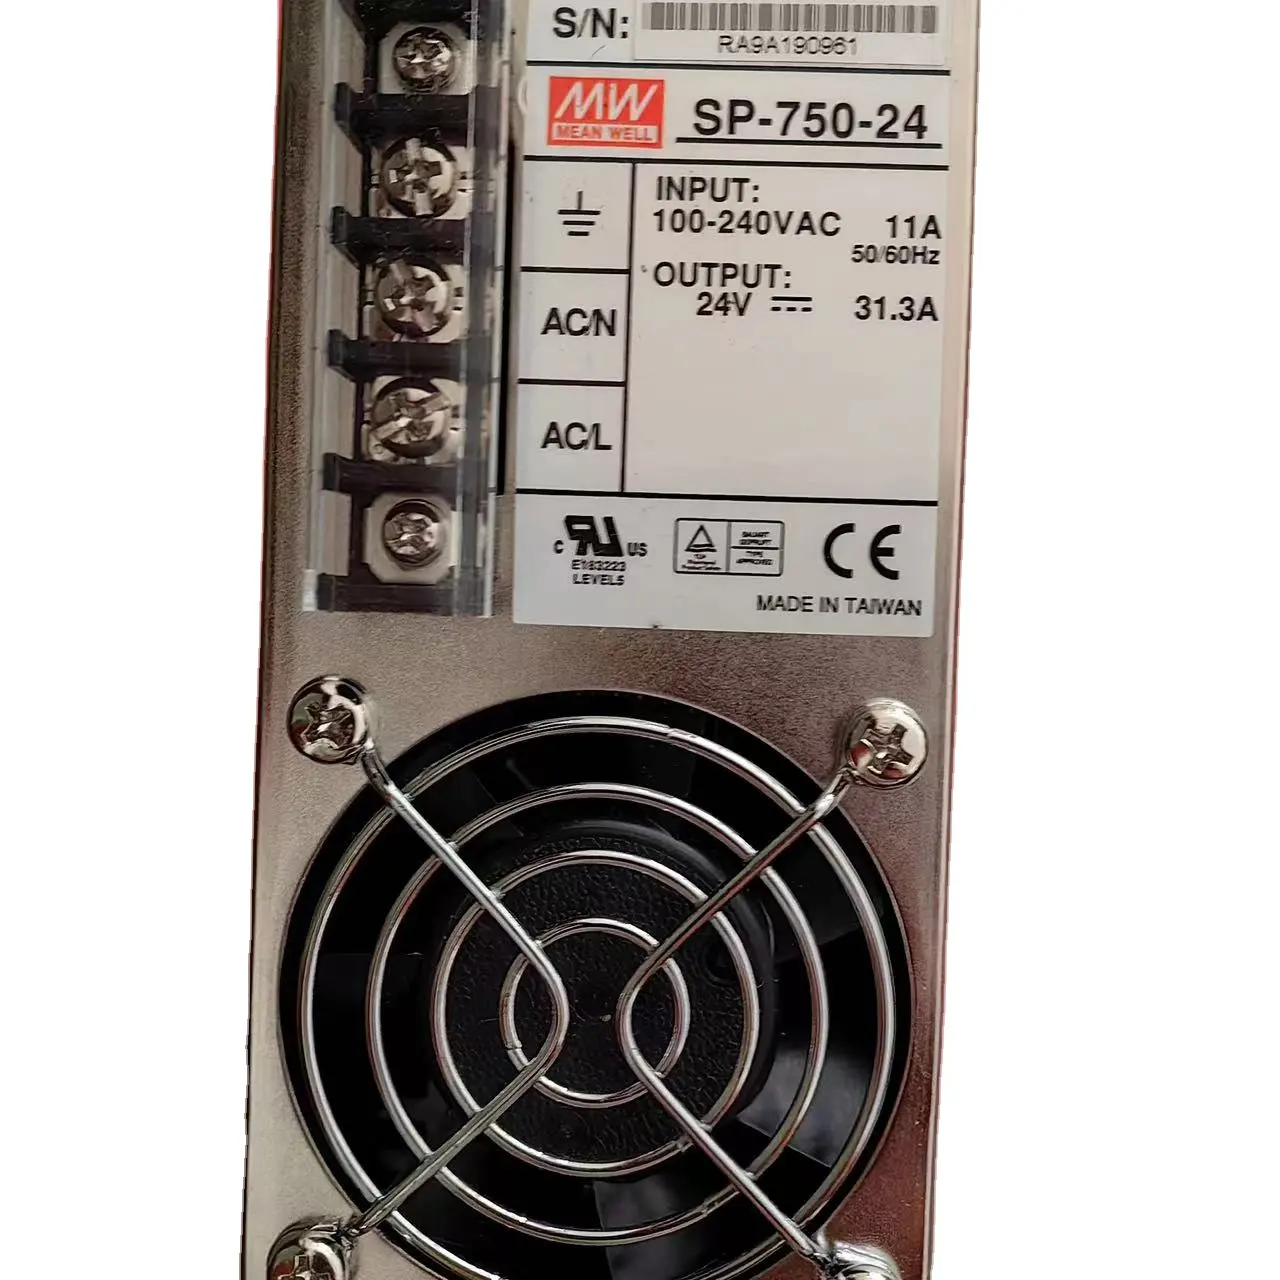 Meanwell SP-750-24 SMPS 750W 24V Switching Power Supply Circuit